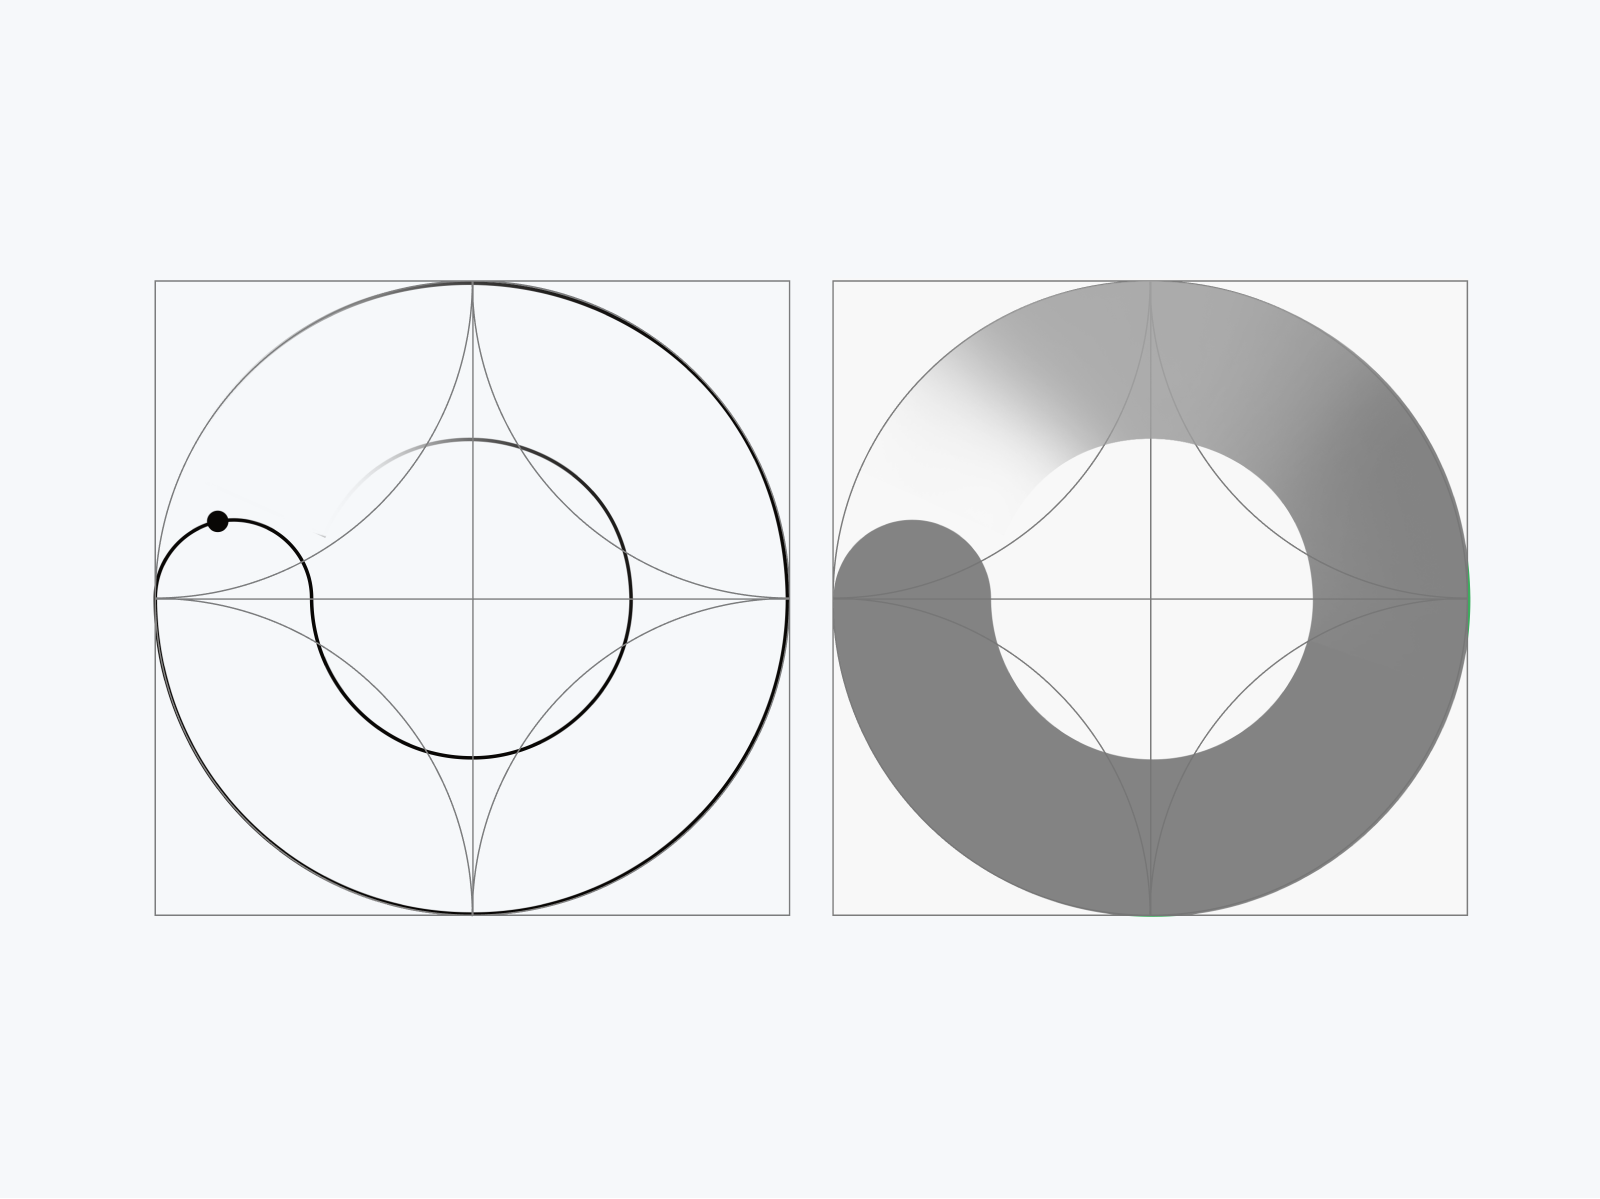 Two side by side grayscale abstract cirular illustrations on our circular grid